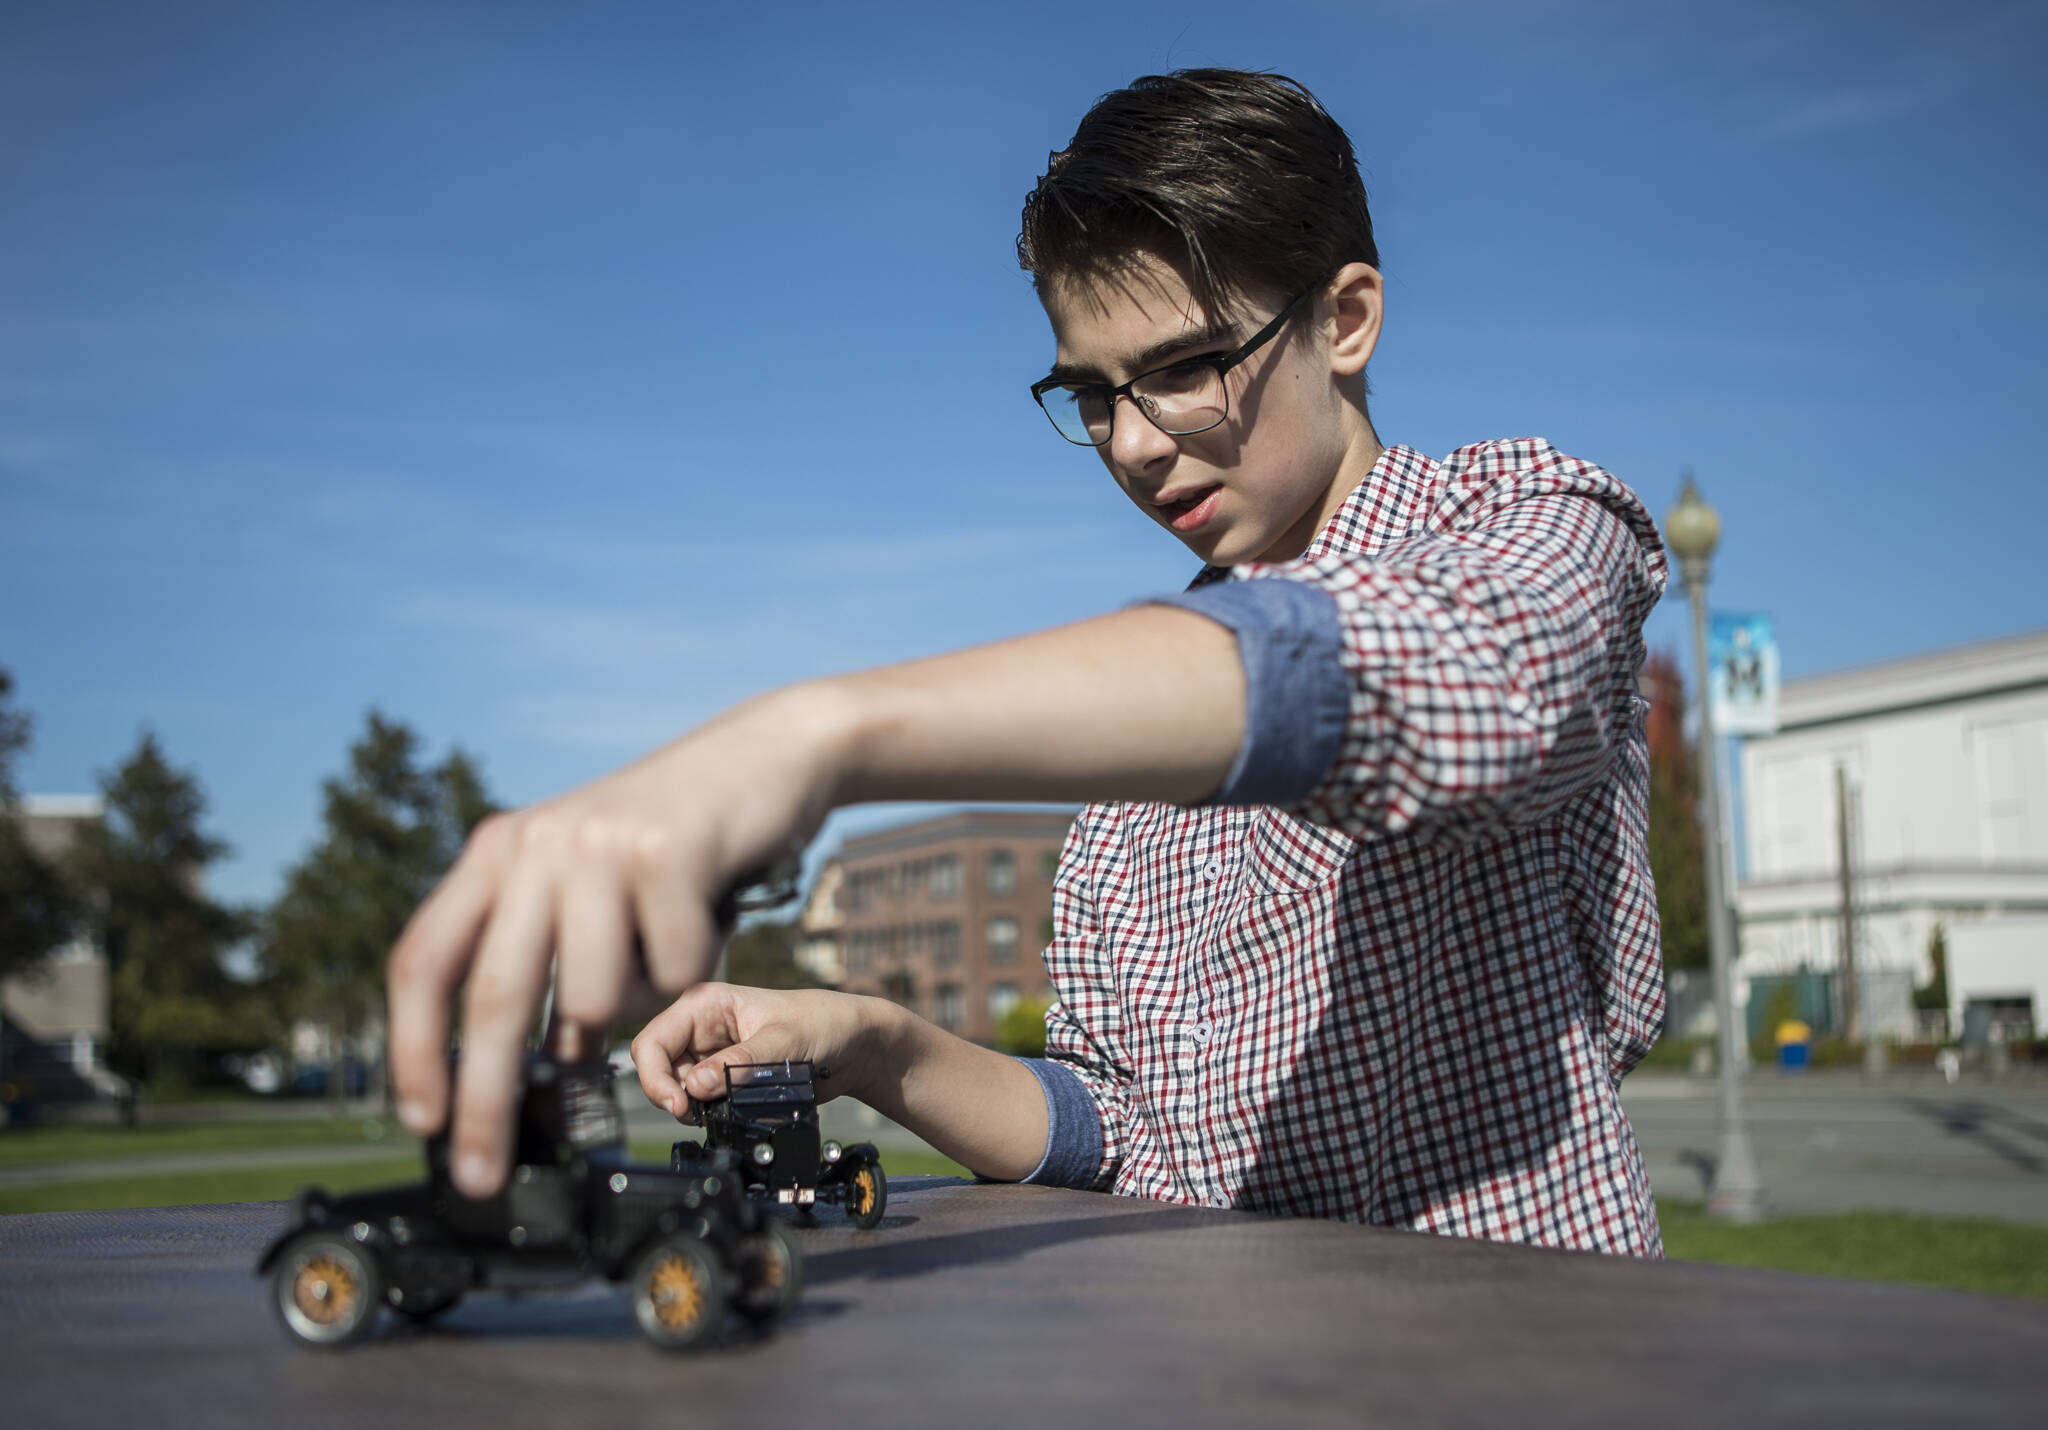 Anthony Schmidt works on setting up a scene in front of Everett High School for his photo shoot using forced perspective photography. In the resulting photo, the model car looks life-sized and real. (Olivia Vanni / The Herald)